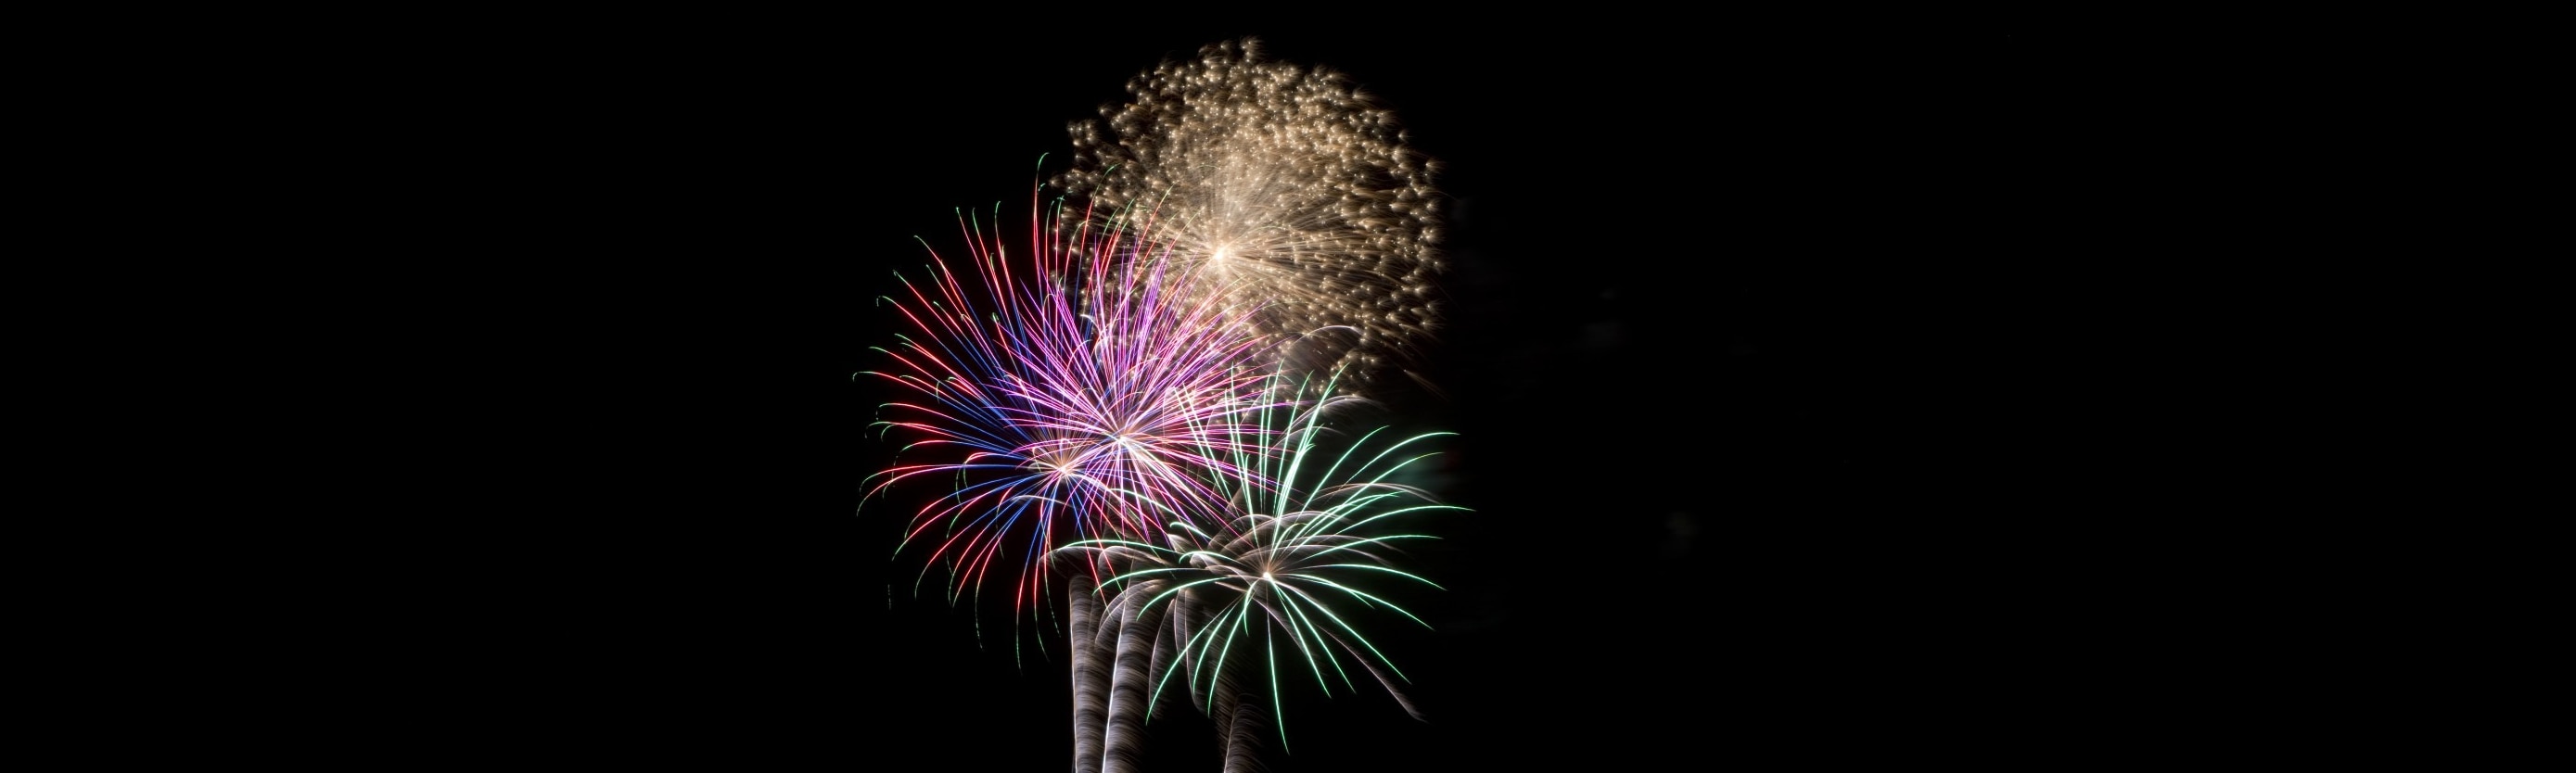 Macy's 4th of July Fireworks 2021: Service Notice and Where to Watch